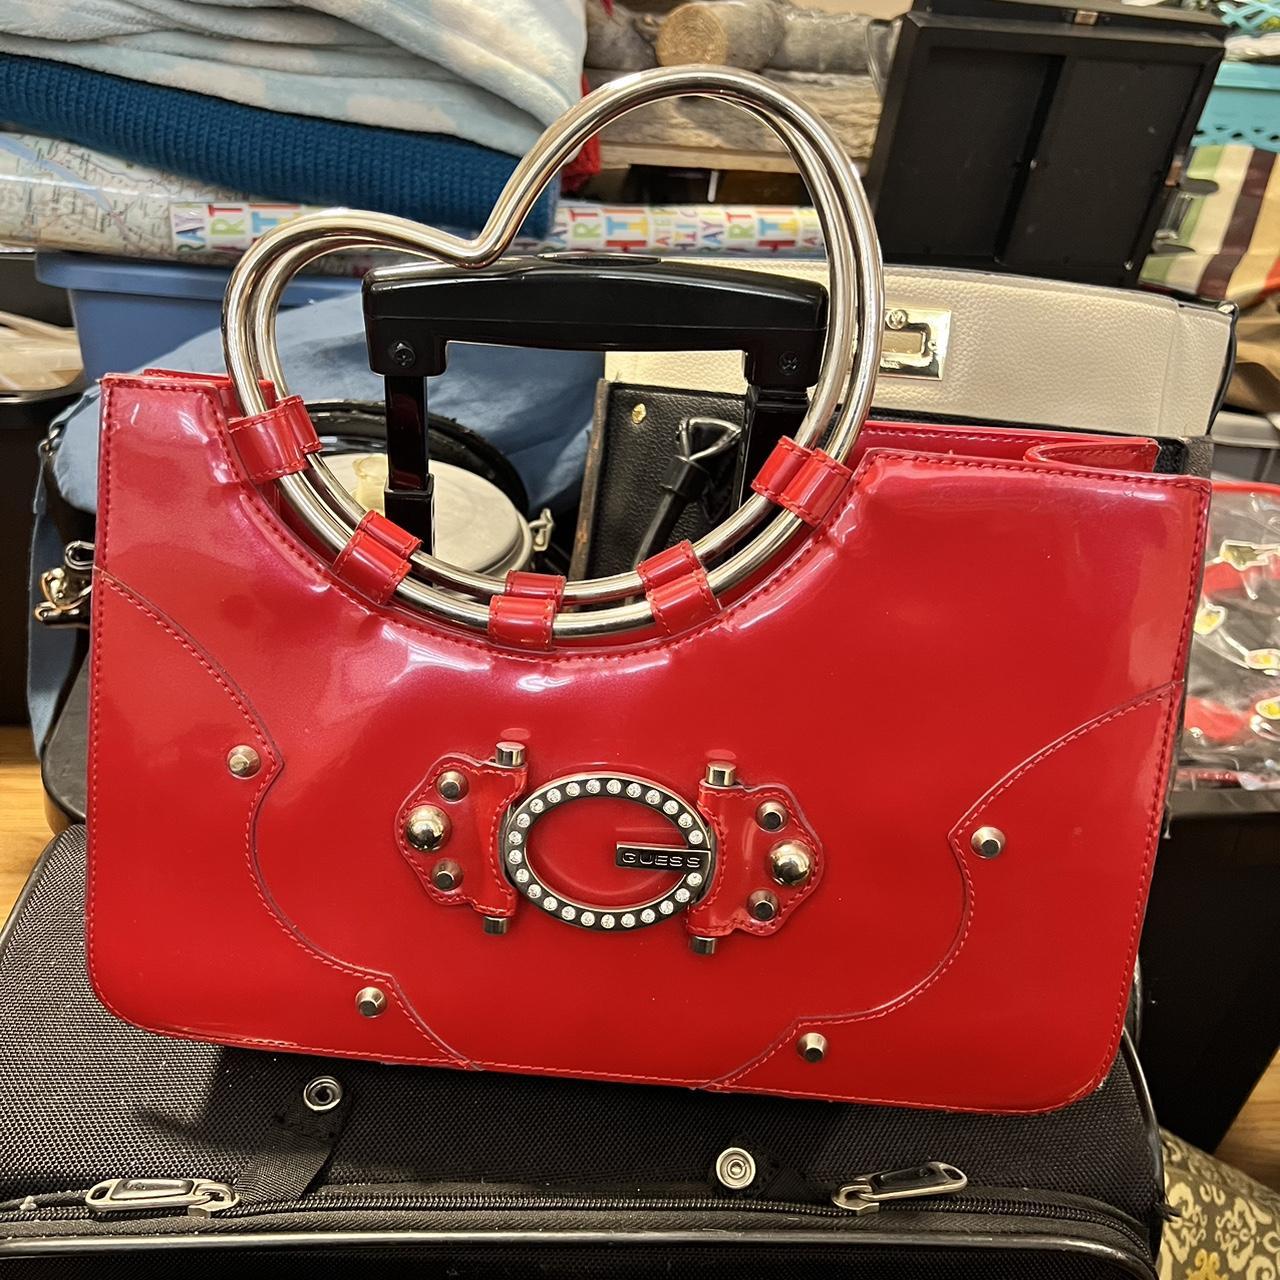 Buyr.com | Totes | GUESS Noelle Elite Tote, Roman RED